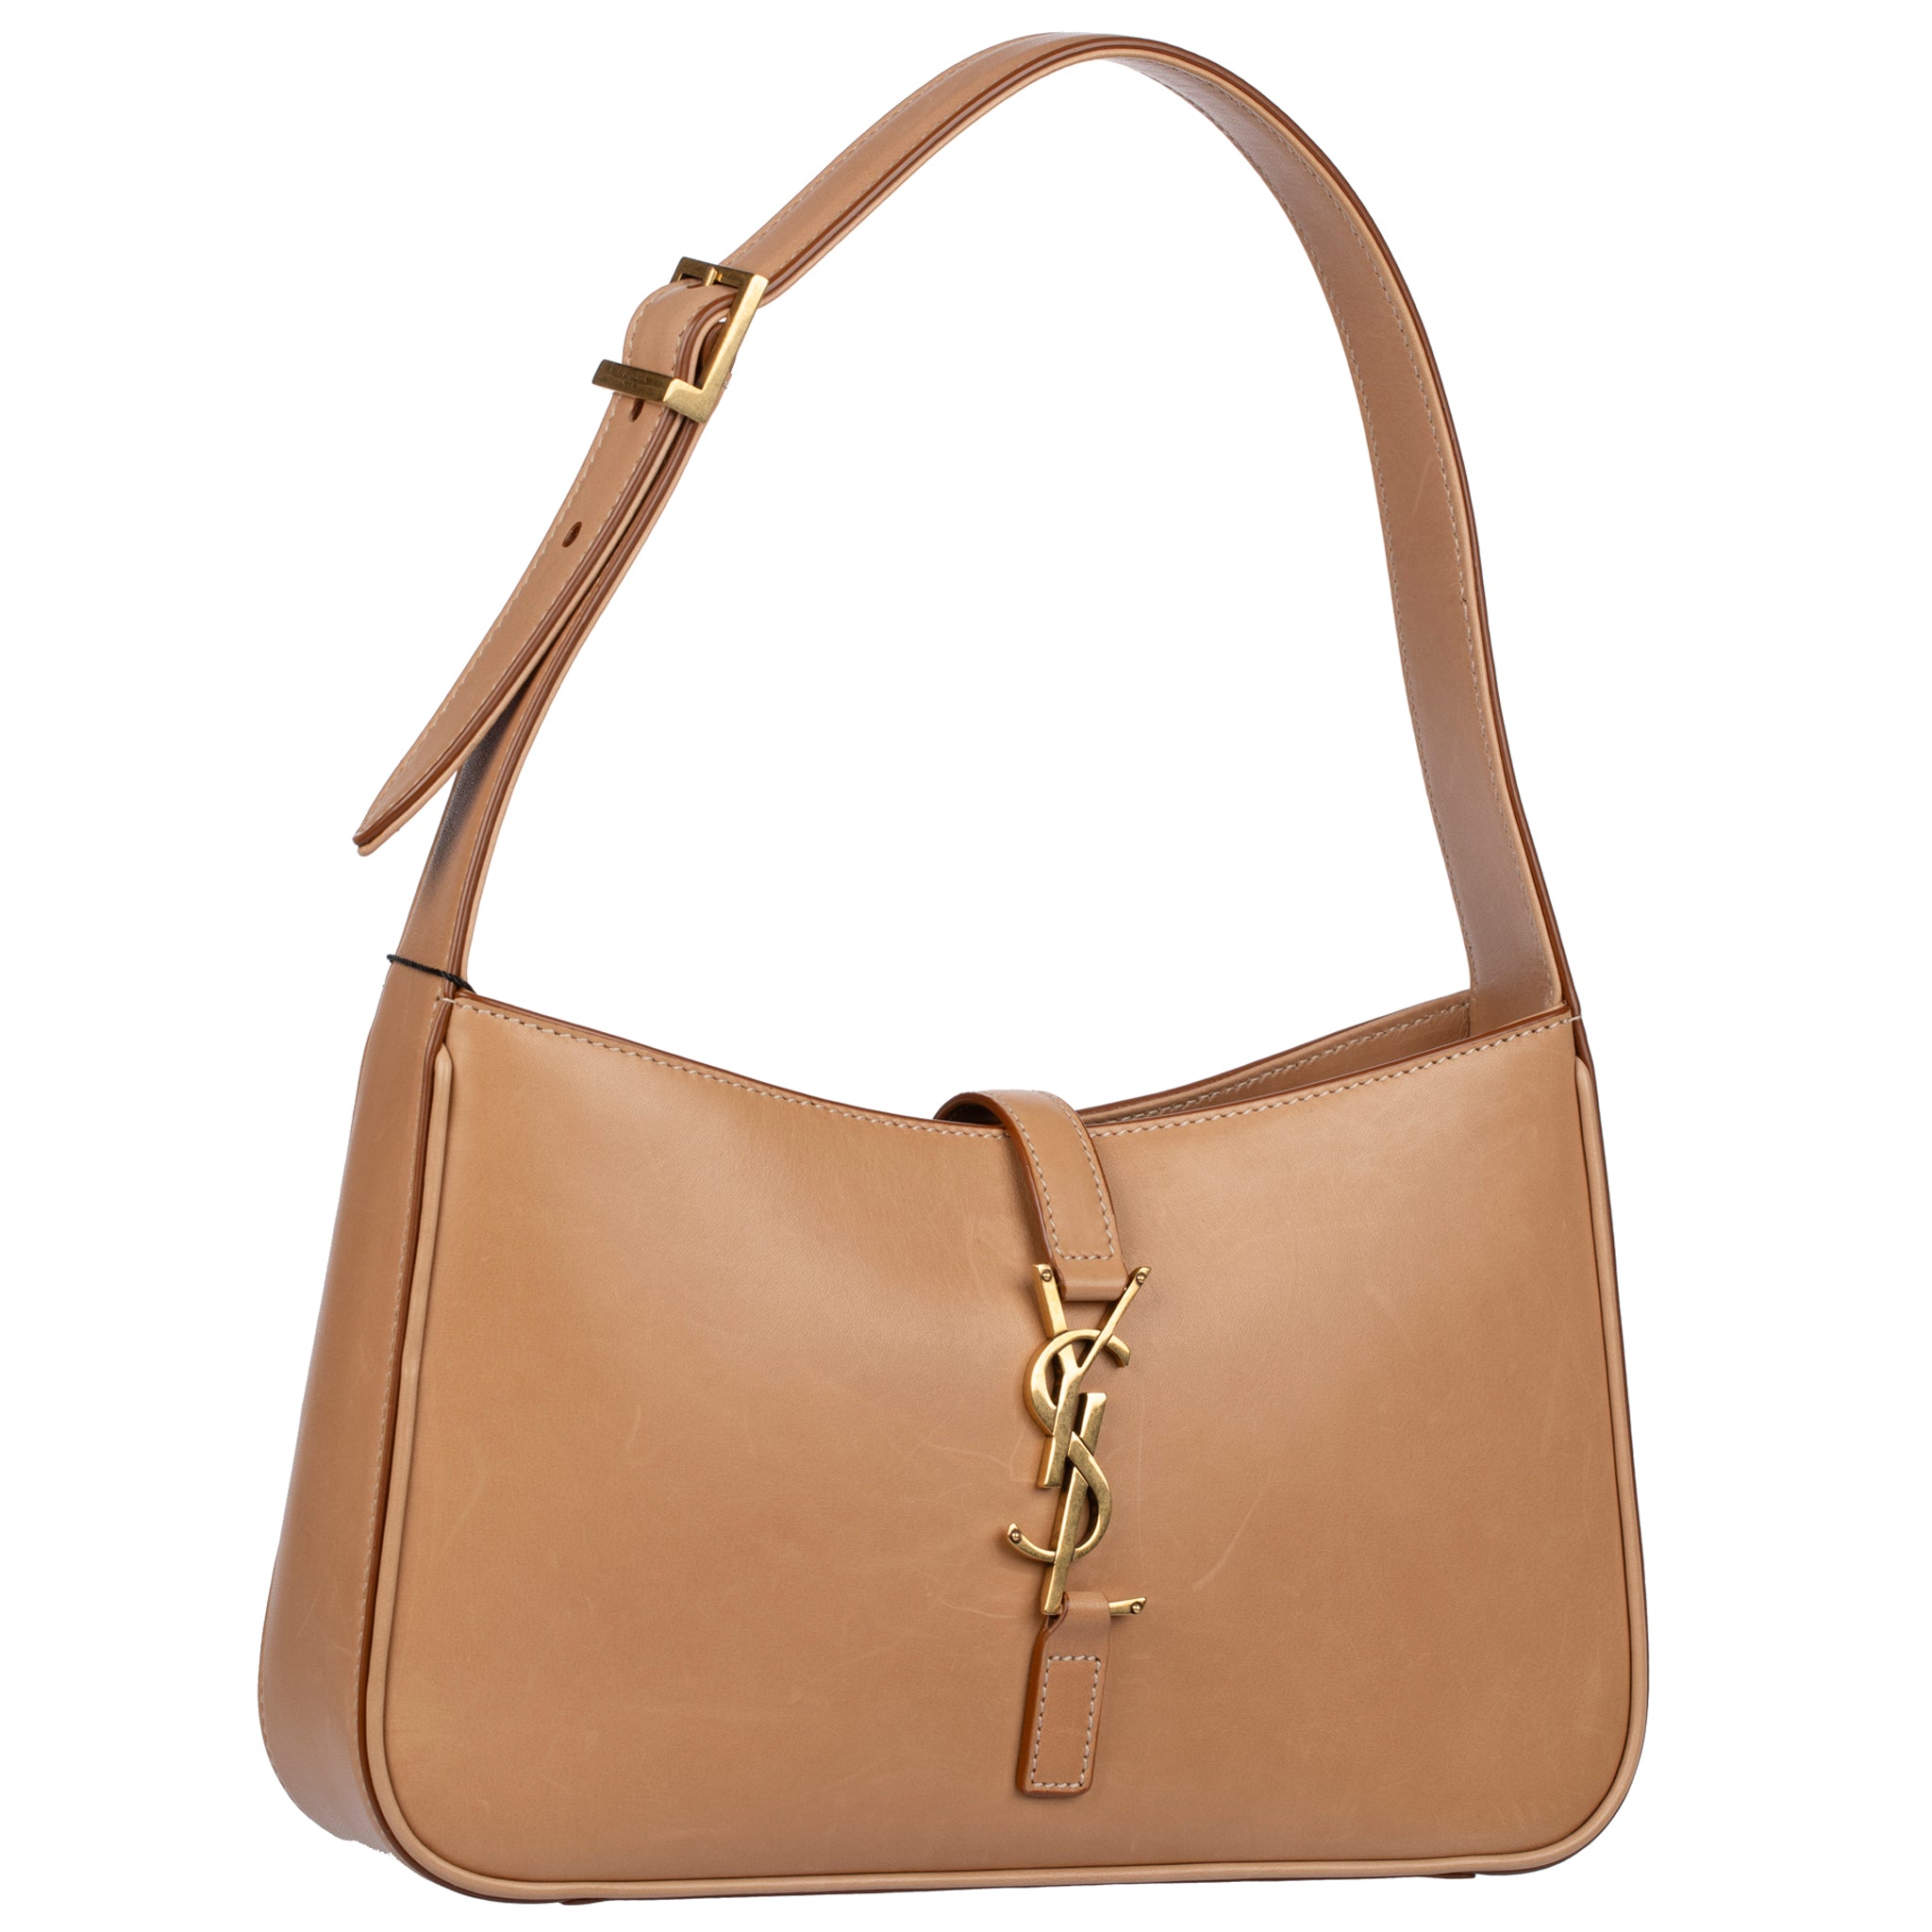 Yves Saint Laurent Le 5 à 7 Hobo Bag Smooth Tan Leather Gold Tone Hardware